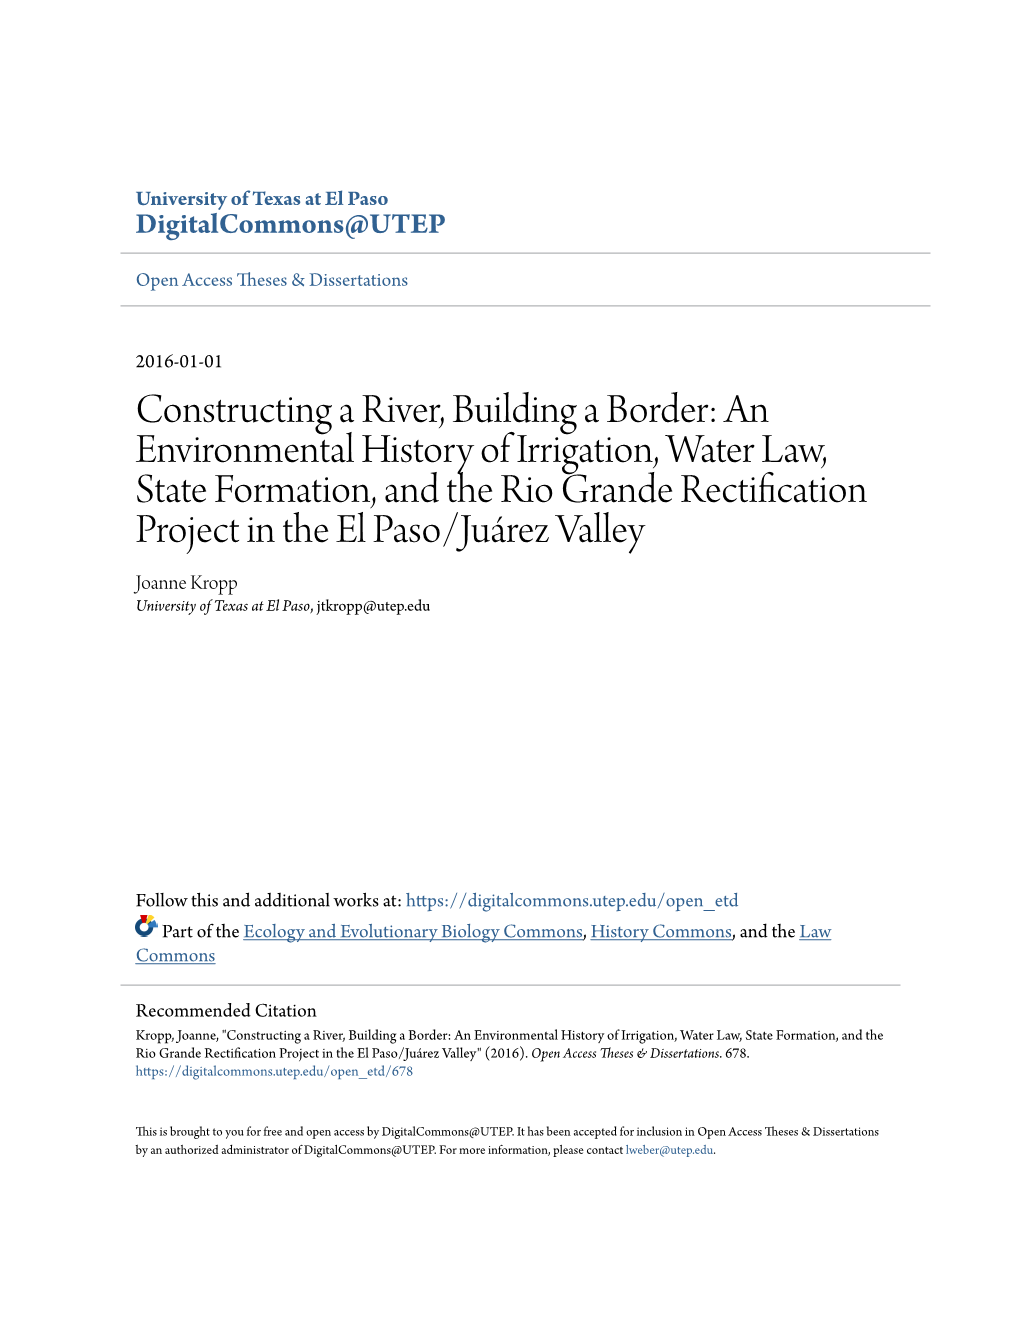 Constructing a River, Building a Border: an Environmental History of Irrigation, Water Law, State Formation, and the Rio Grande